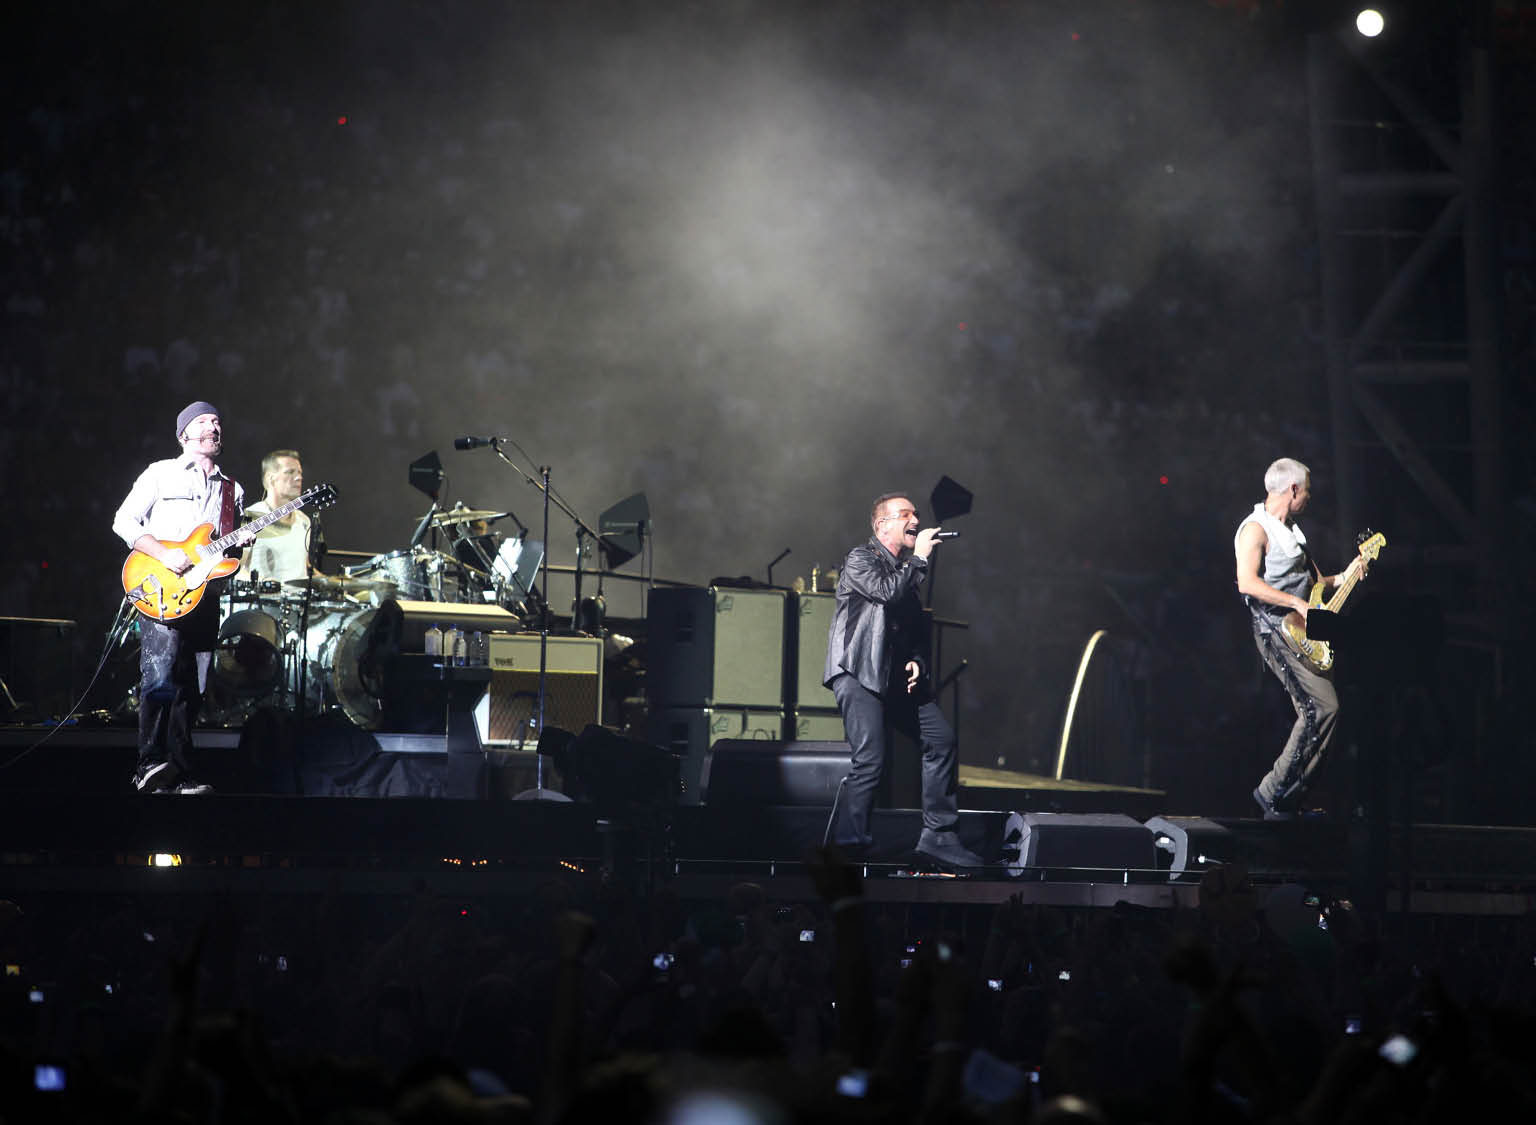 U2 officially announce the 2015 Innocence + Experience World Tour only in indoor arenas. Shown here are archive images from the 360 tour in the Italian big sport arena (Olympic in Turin and Meazza in Milan). Next Italian stop will be in Turin's Olympic A on September 4 and 5, 2015.  Pictured: U2 Ref: SPL902826  031214   Picture by: Bruno Marzi / Splash News  Splash News and Pictures Los Angeles:310-821-2666 New York:212-619-2666 London:870-934-2666 photodesk@splashnews.com  U2 officially announce the 2015 Innocence + Experience World Tour only in indoor arenas. Shown here are archive images from the 360 tour in the Italian big sport arena (Olympic in Turin and Meazza in Milan). Next Italian stop will be in Turin's Olympic A on September 4 and 5, 2015.  Pictured: U2 Ref: SPL902826  031214   Picture by: Bruno Marzi / Splash News  Splash News and Pictures Los Angeles:310-821-2666 New York:212-619-2666 London:870-934-2666 photodesk@splashnews.com  U2 officially announce the 2015 Innocence + Experience World Tour only in indoor arenas. Shown here are archive images from the 360 tour in the Italian big sport arena (Olympic in Turin and Meazza in Milan). Next Italian stop will be in Turin's Olympic A on September 4 and 5, 2015.  Pictured: U2 Ref: SPL902826  031214   Picture by: Bruno Marzi / Splash News  Splash News and Pictures Los Angeles:310-821-2666 New York:212-619-2666 London:870-934-2666 photodesk@splashnews.com